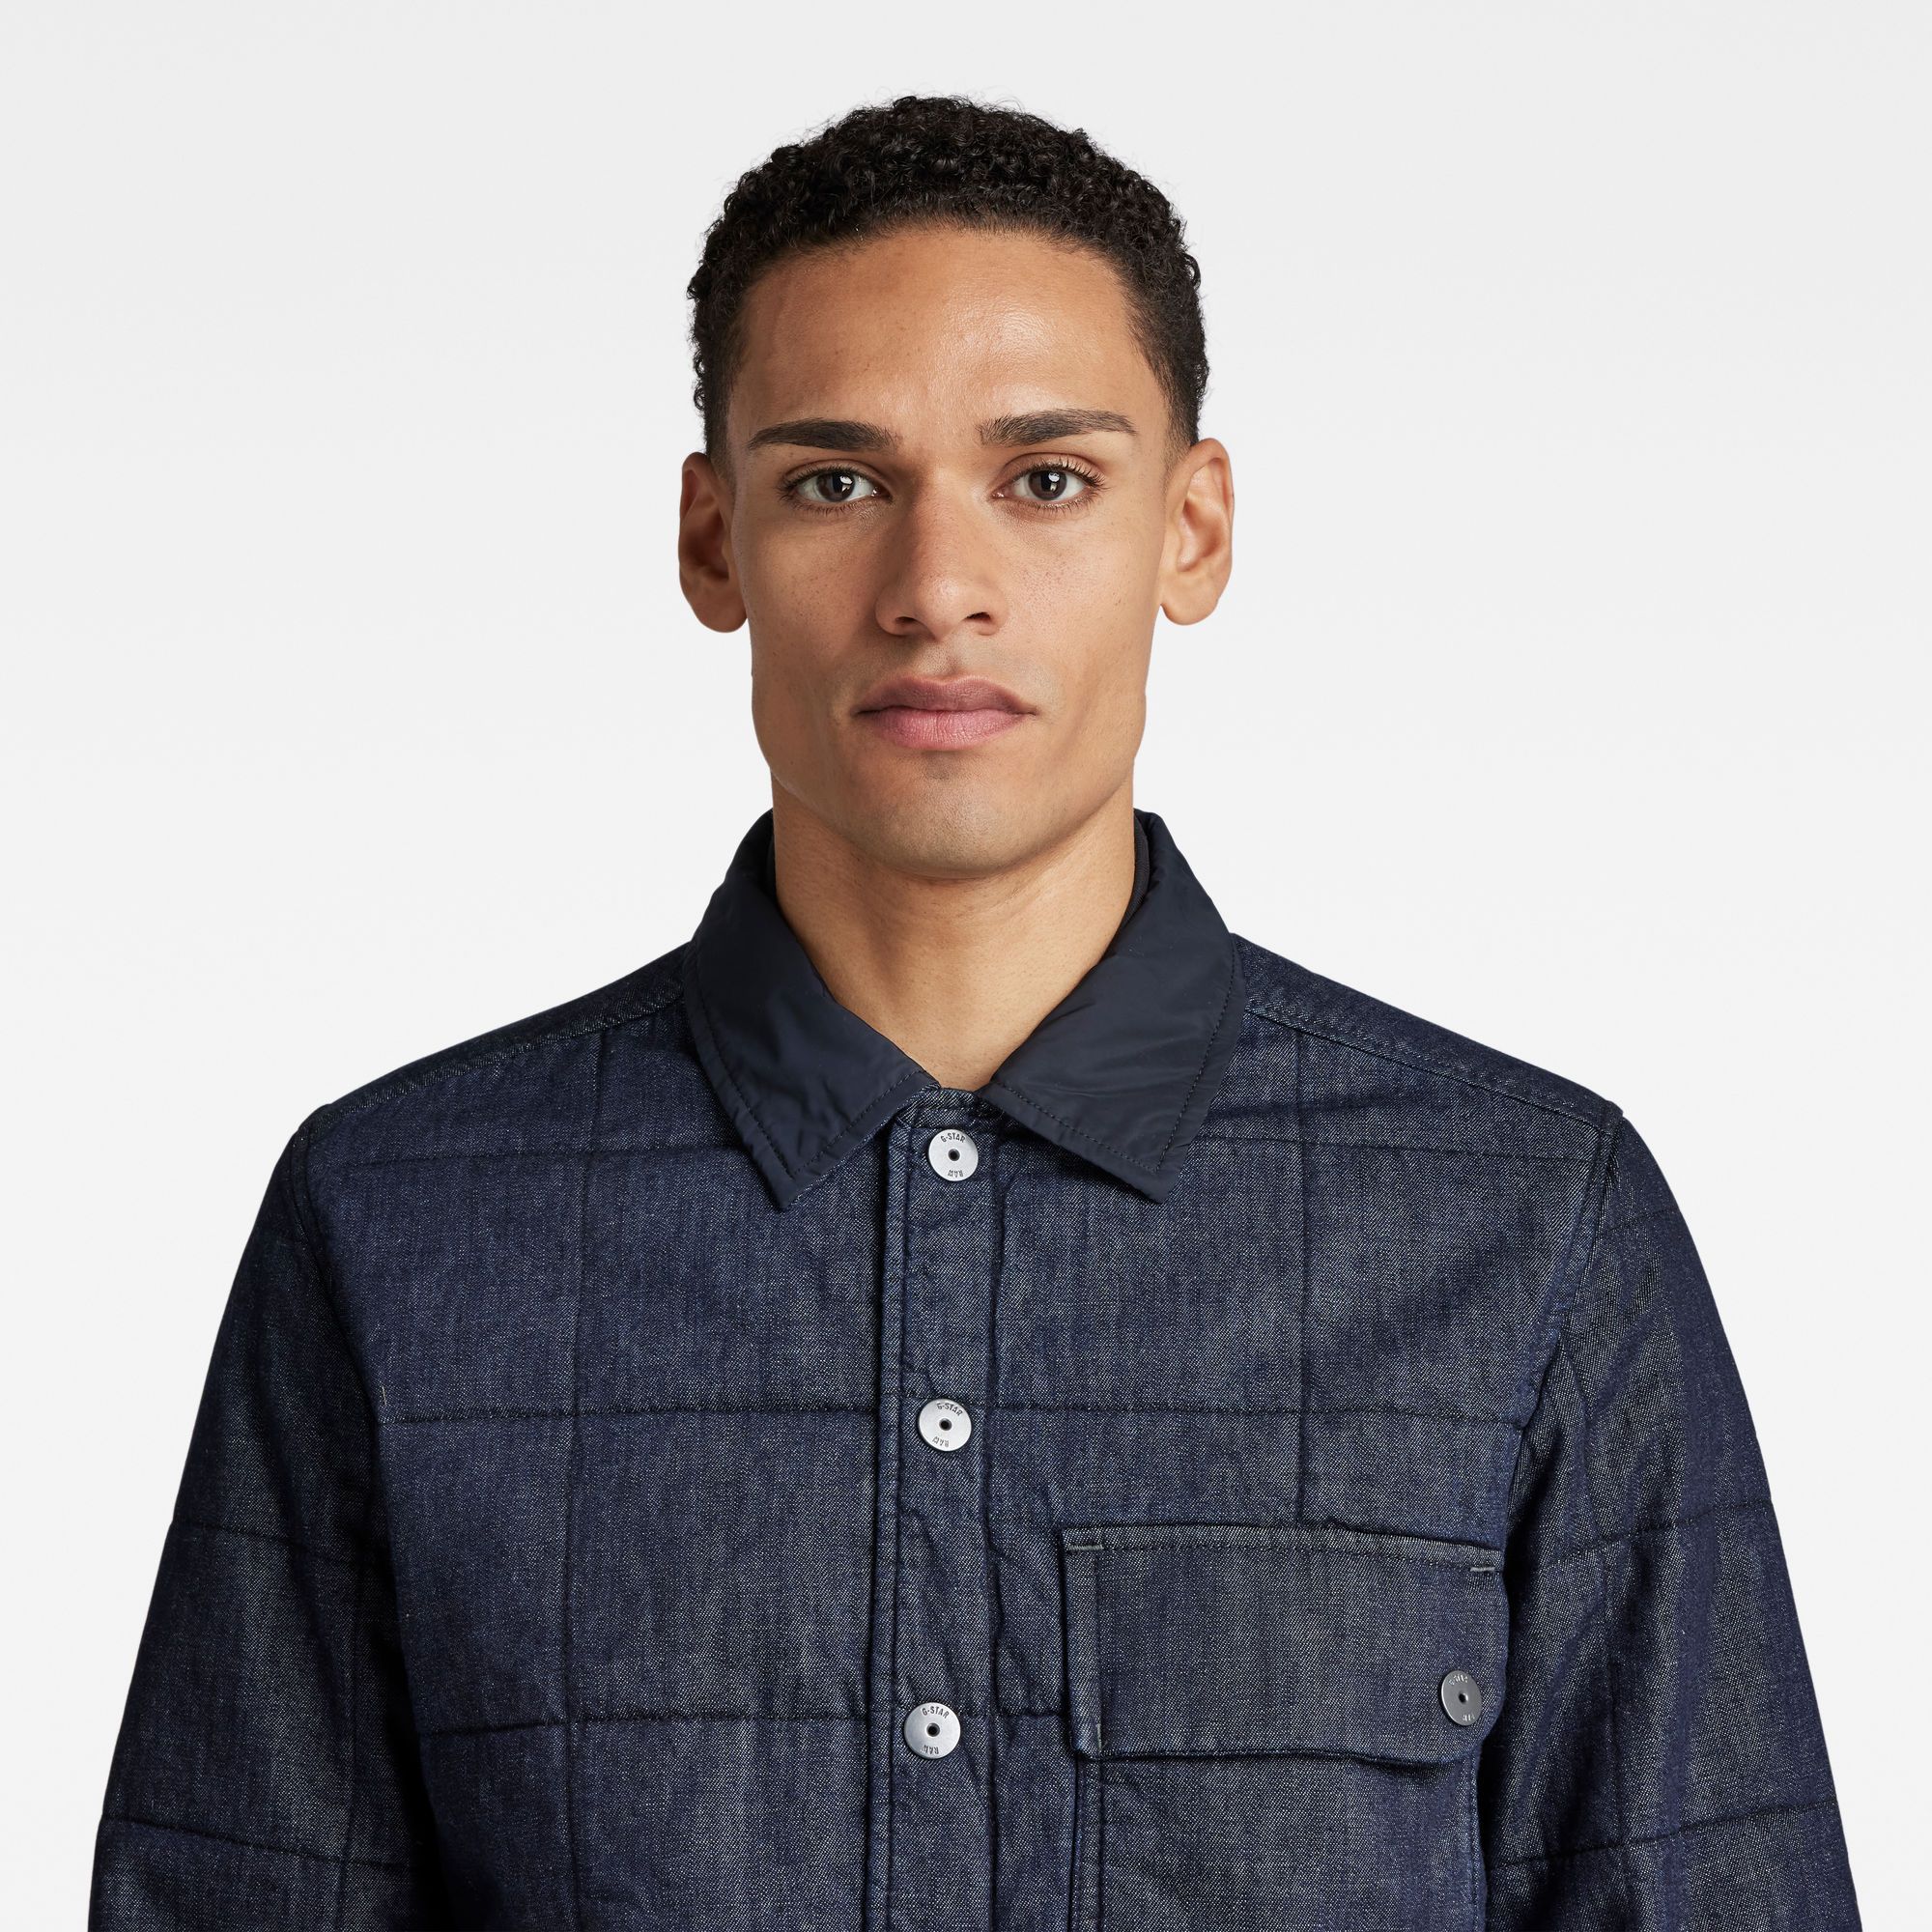 Flat collar- inner rib collar. Long sleeves, cuffed- snap button closure. Chest pocket with flap and snap button closure- side entry pocket underneath. Side seam pockets. Side slits. Snap button closure. Snap closure. A lightweight denim with a rich, uneven surface texture. Lightweight 7 oz denim. Straight